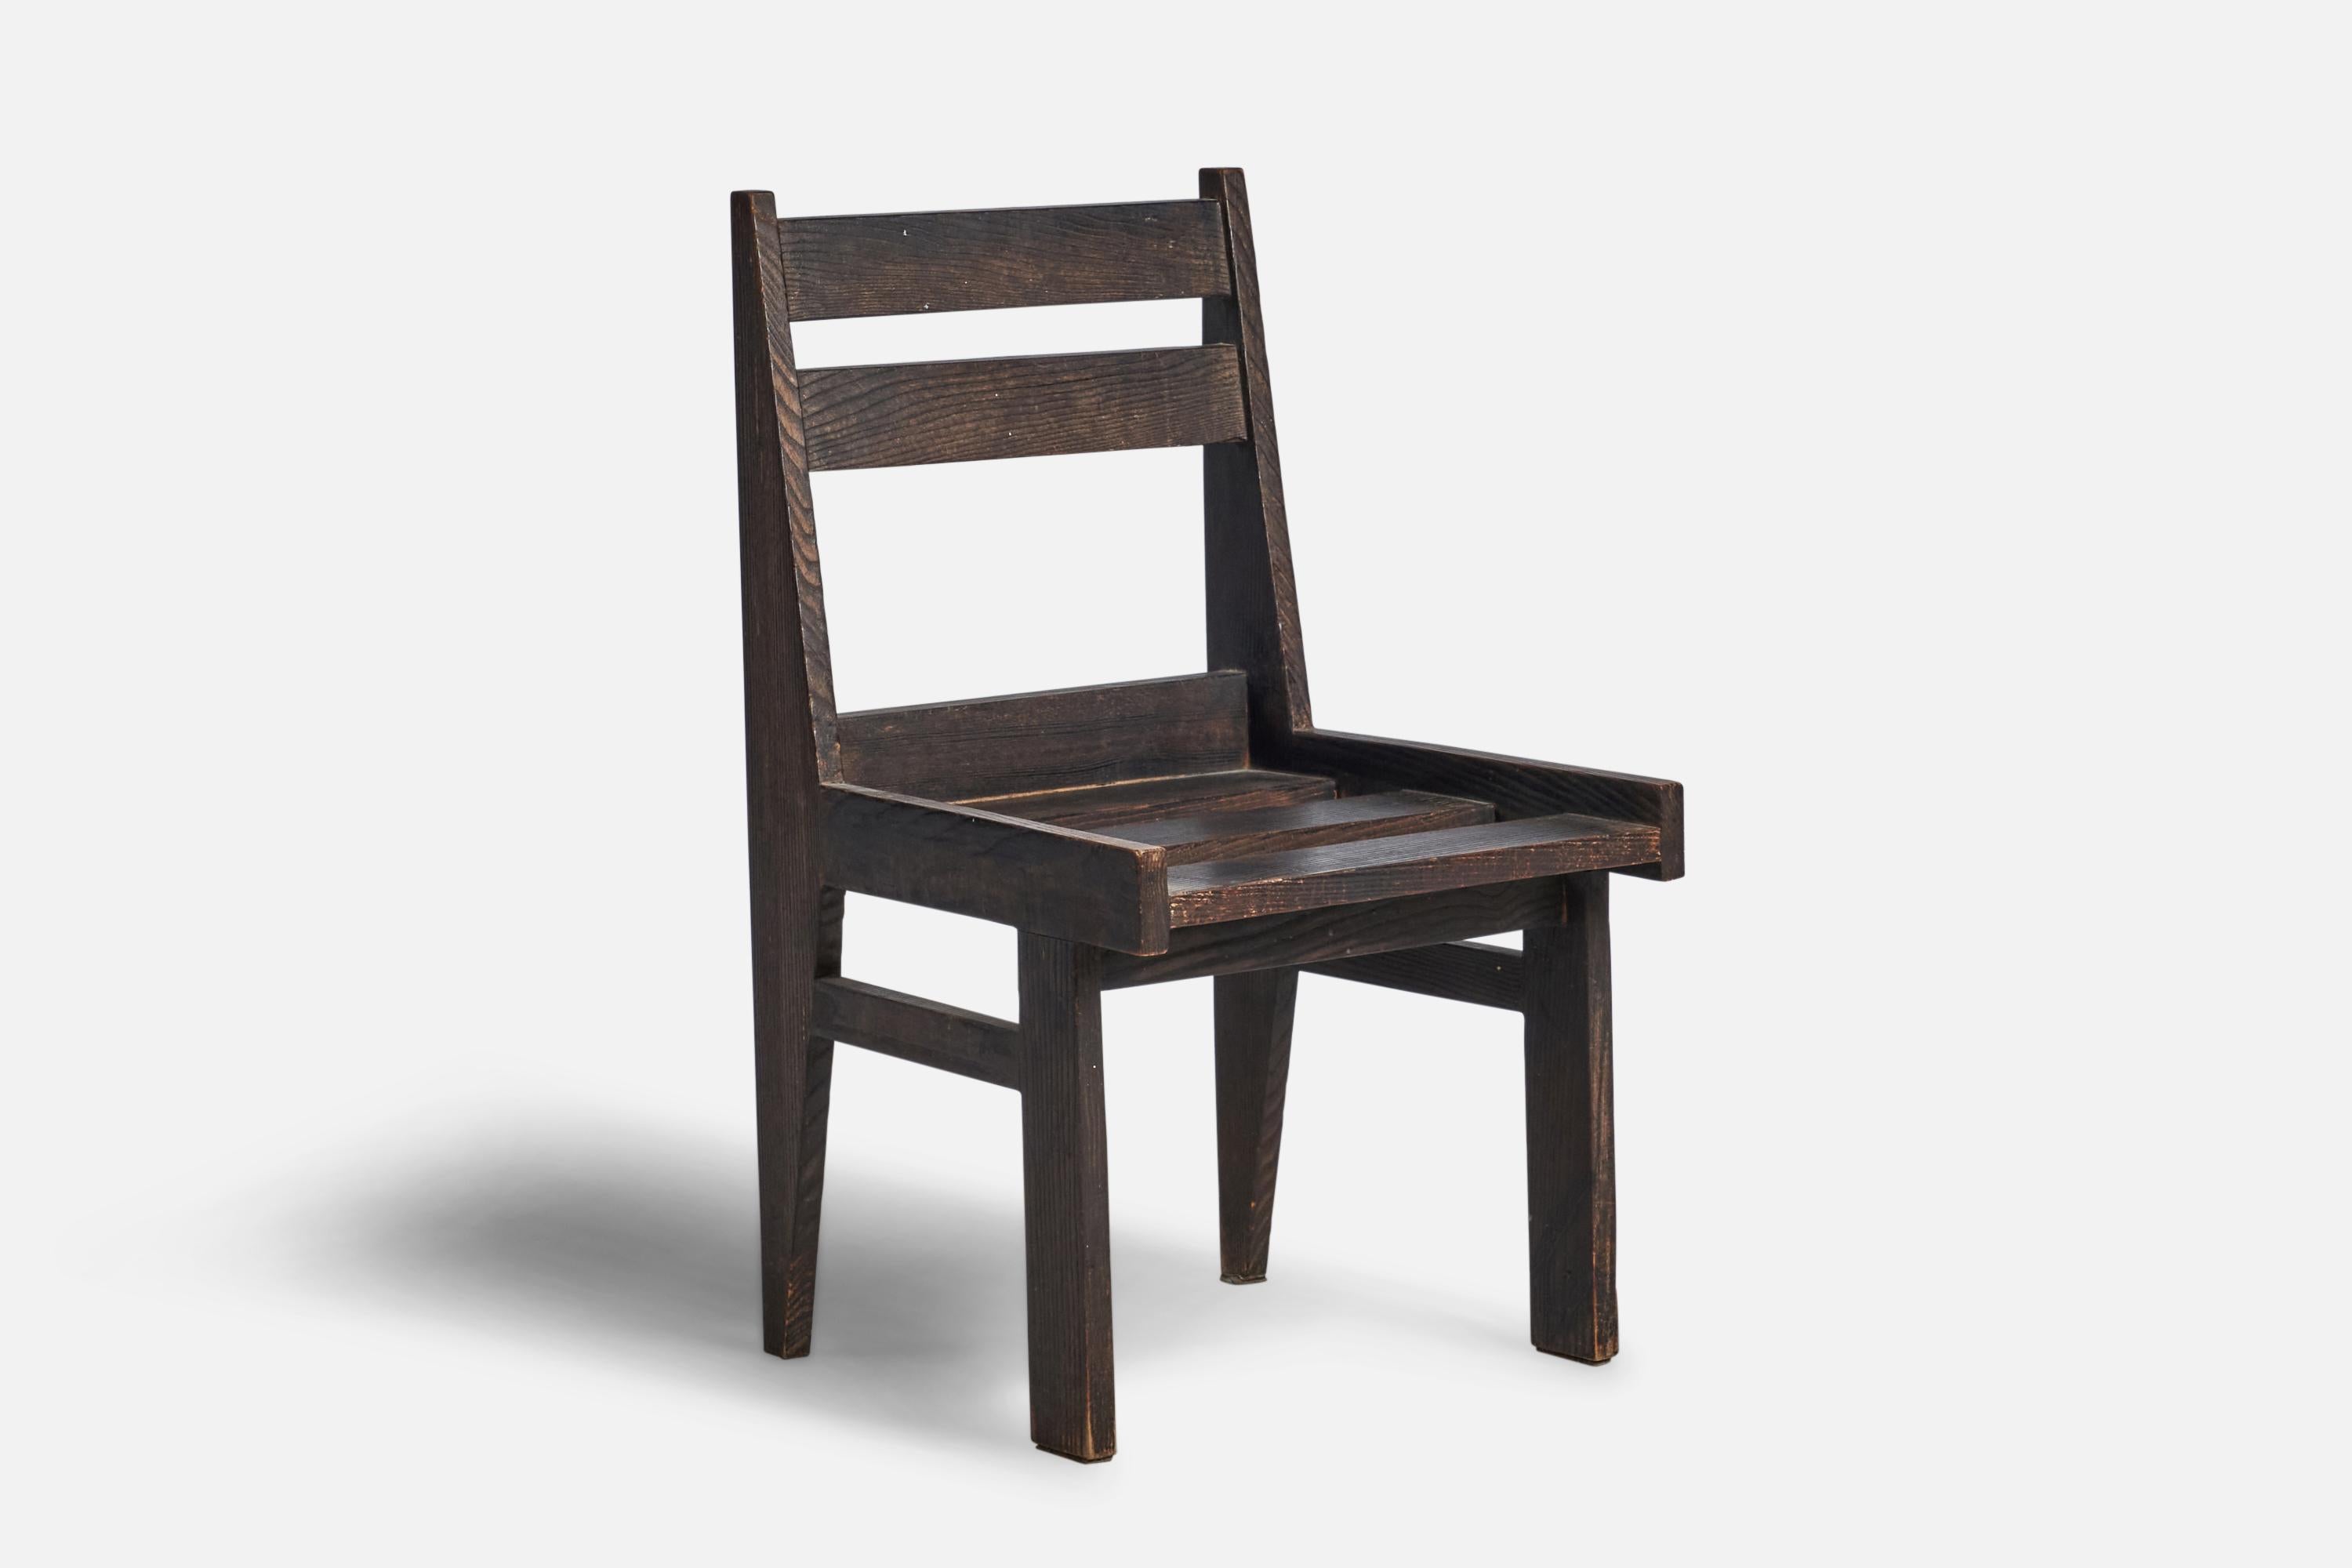 A dark-stained oak side chair designed and produced in the Netherlands, c. 1940s.

14.75” seat height